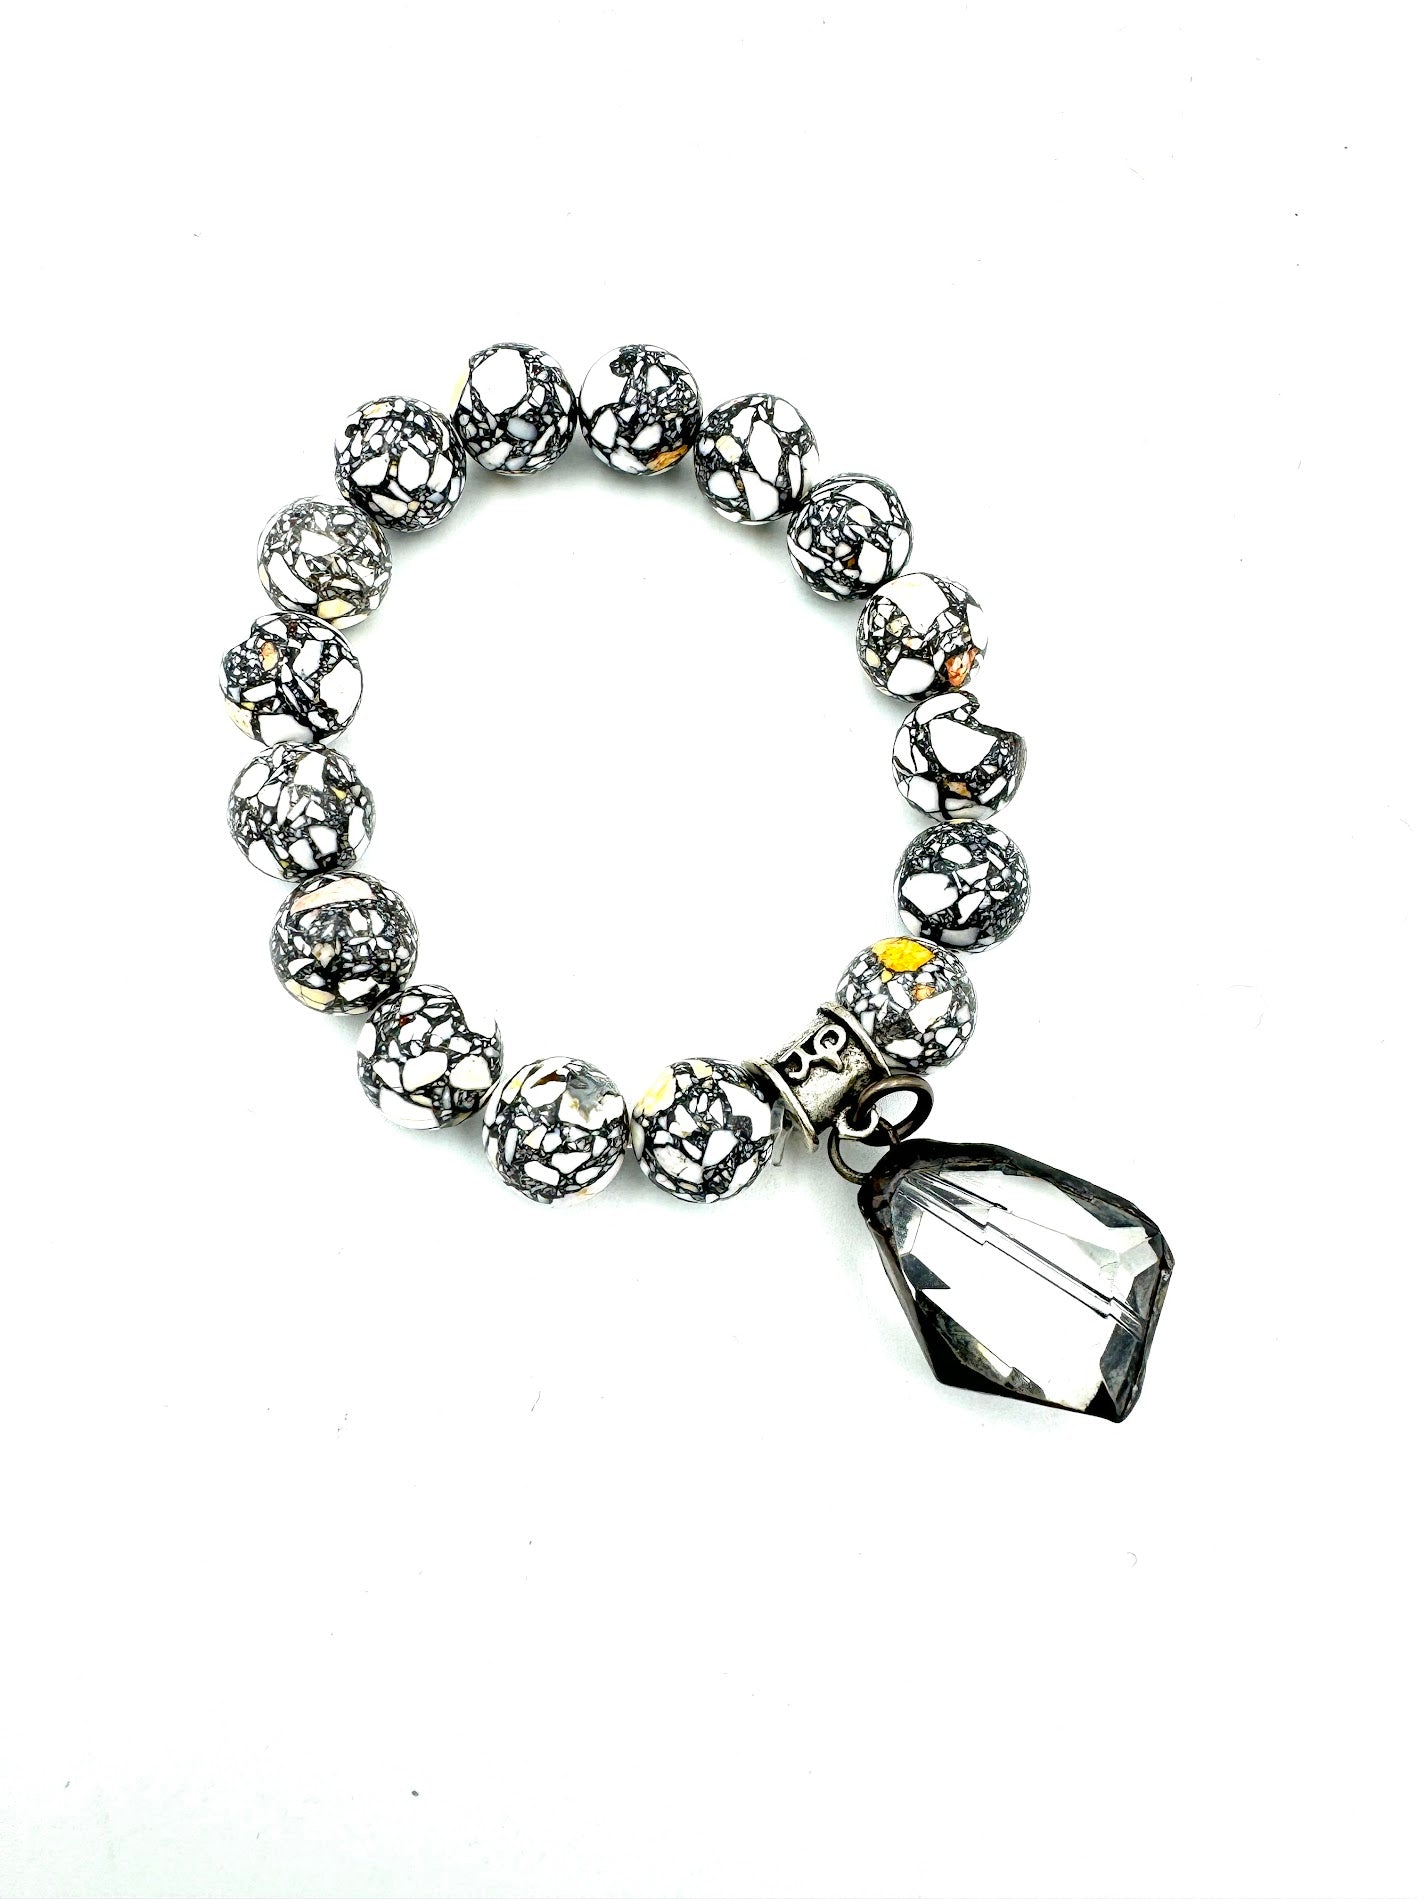 Mosaic Bracelet with Assorted Crystal Drop